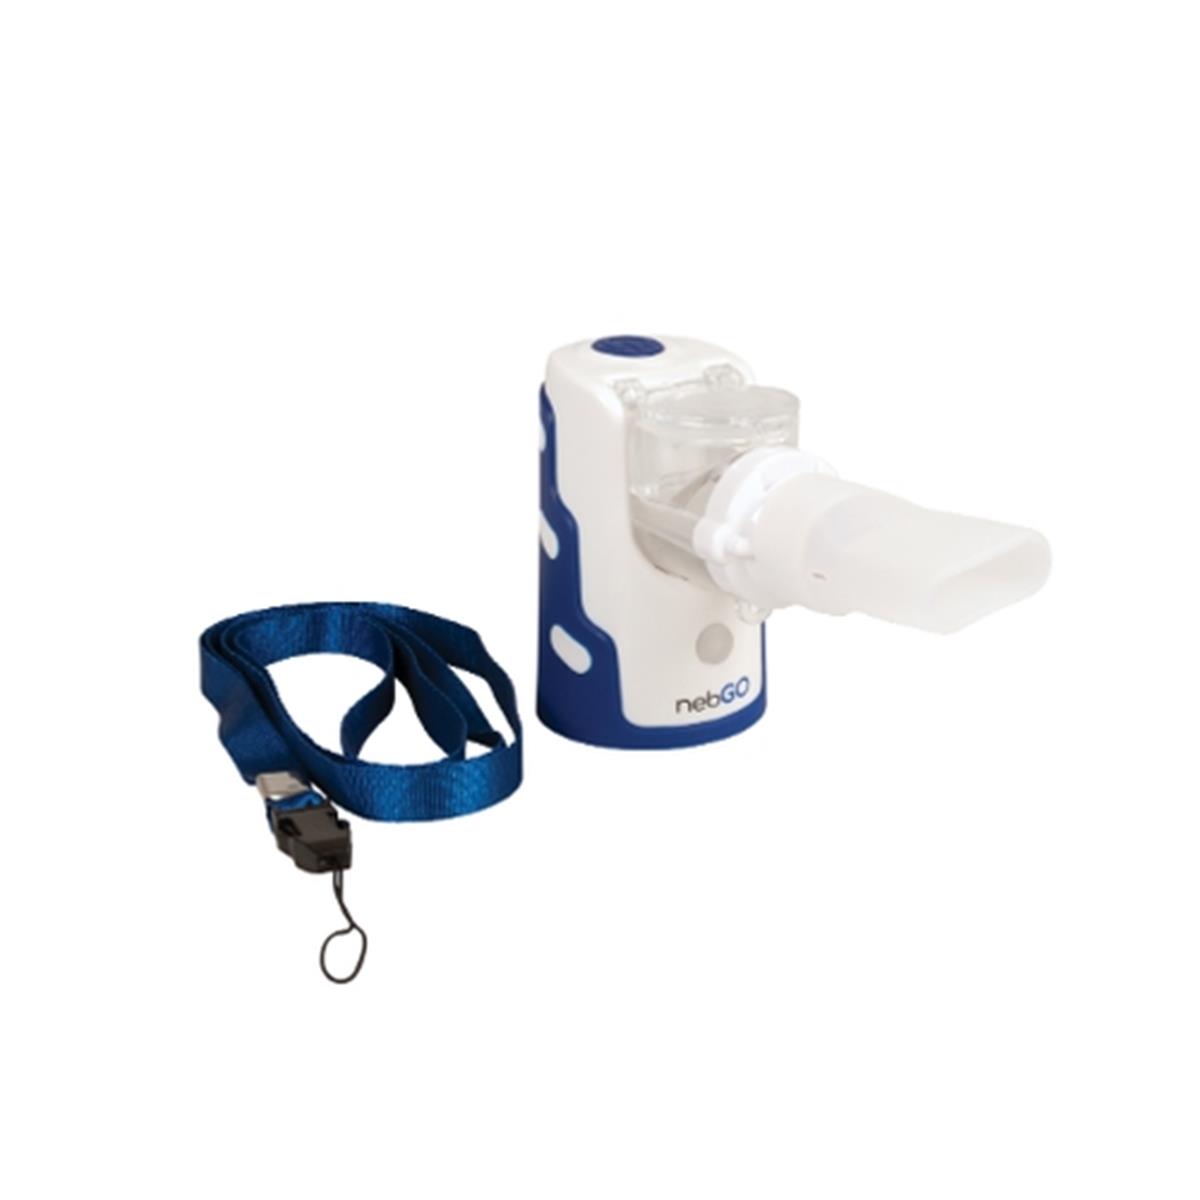 Picture of Roscoe Medical NEB-GO Hand Held Nebulizer with Carry Tote